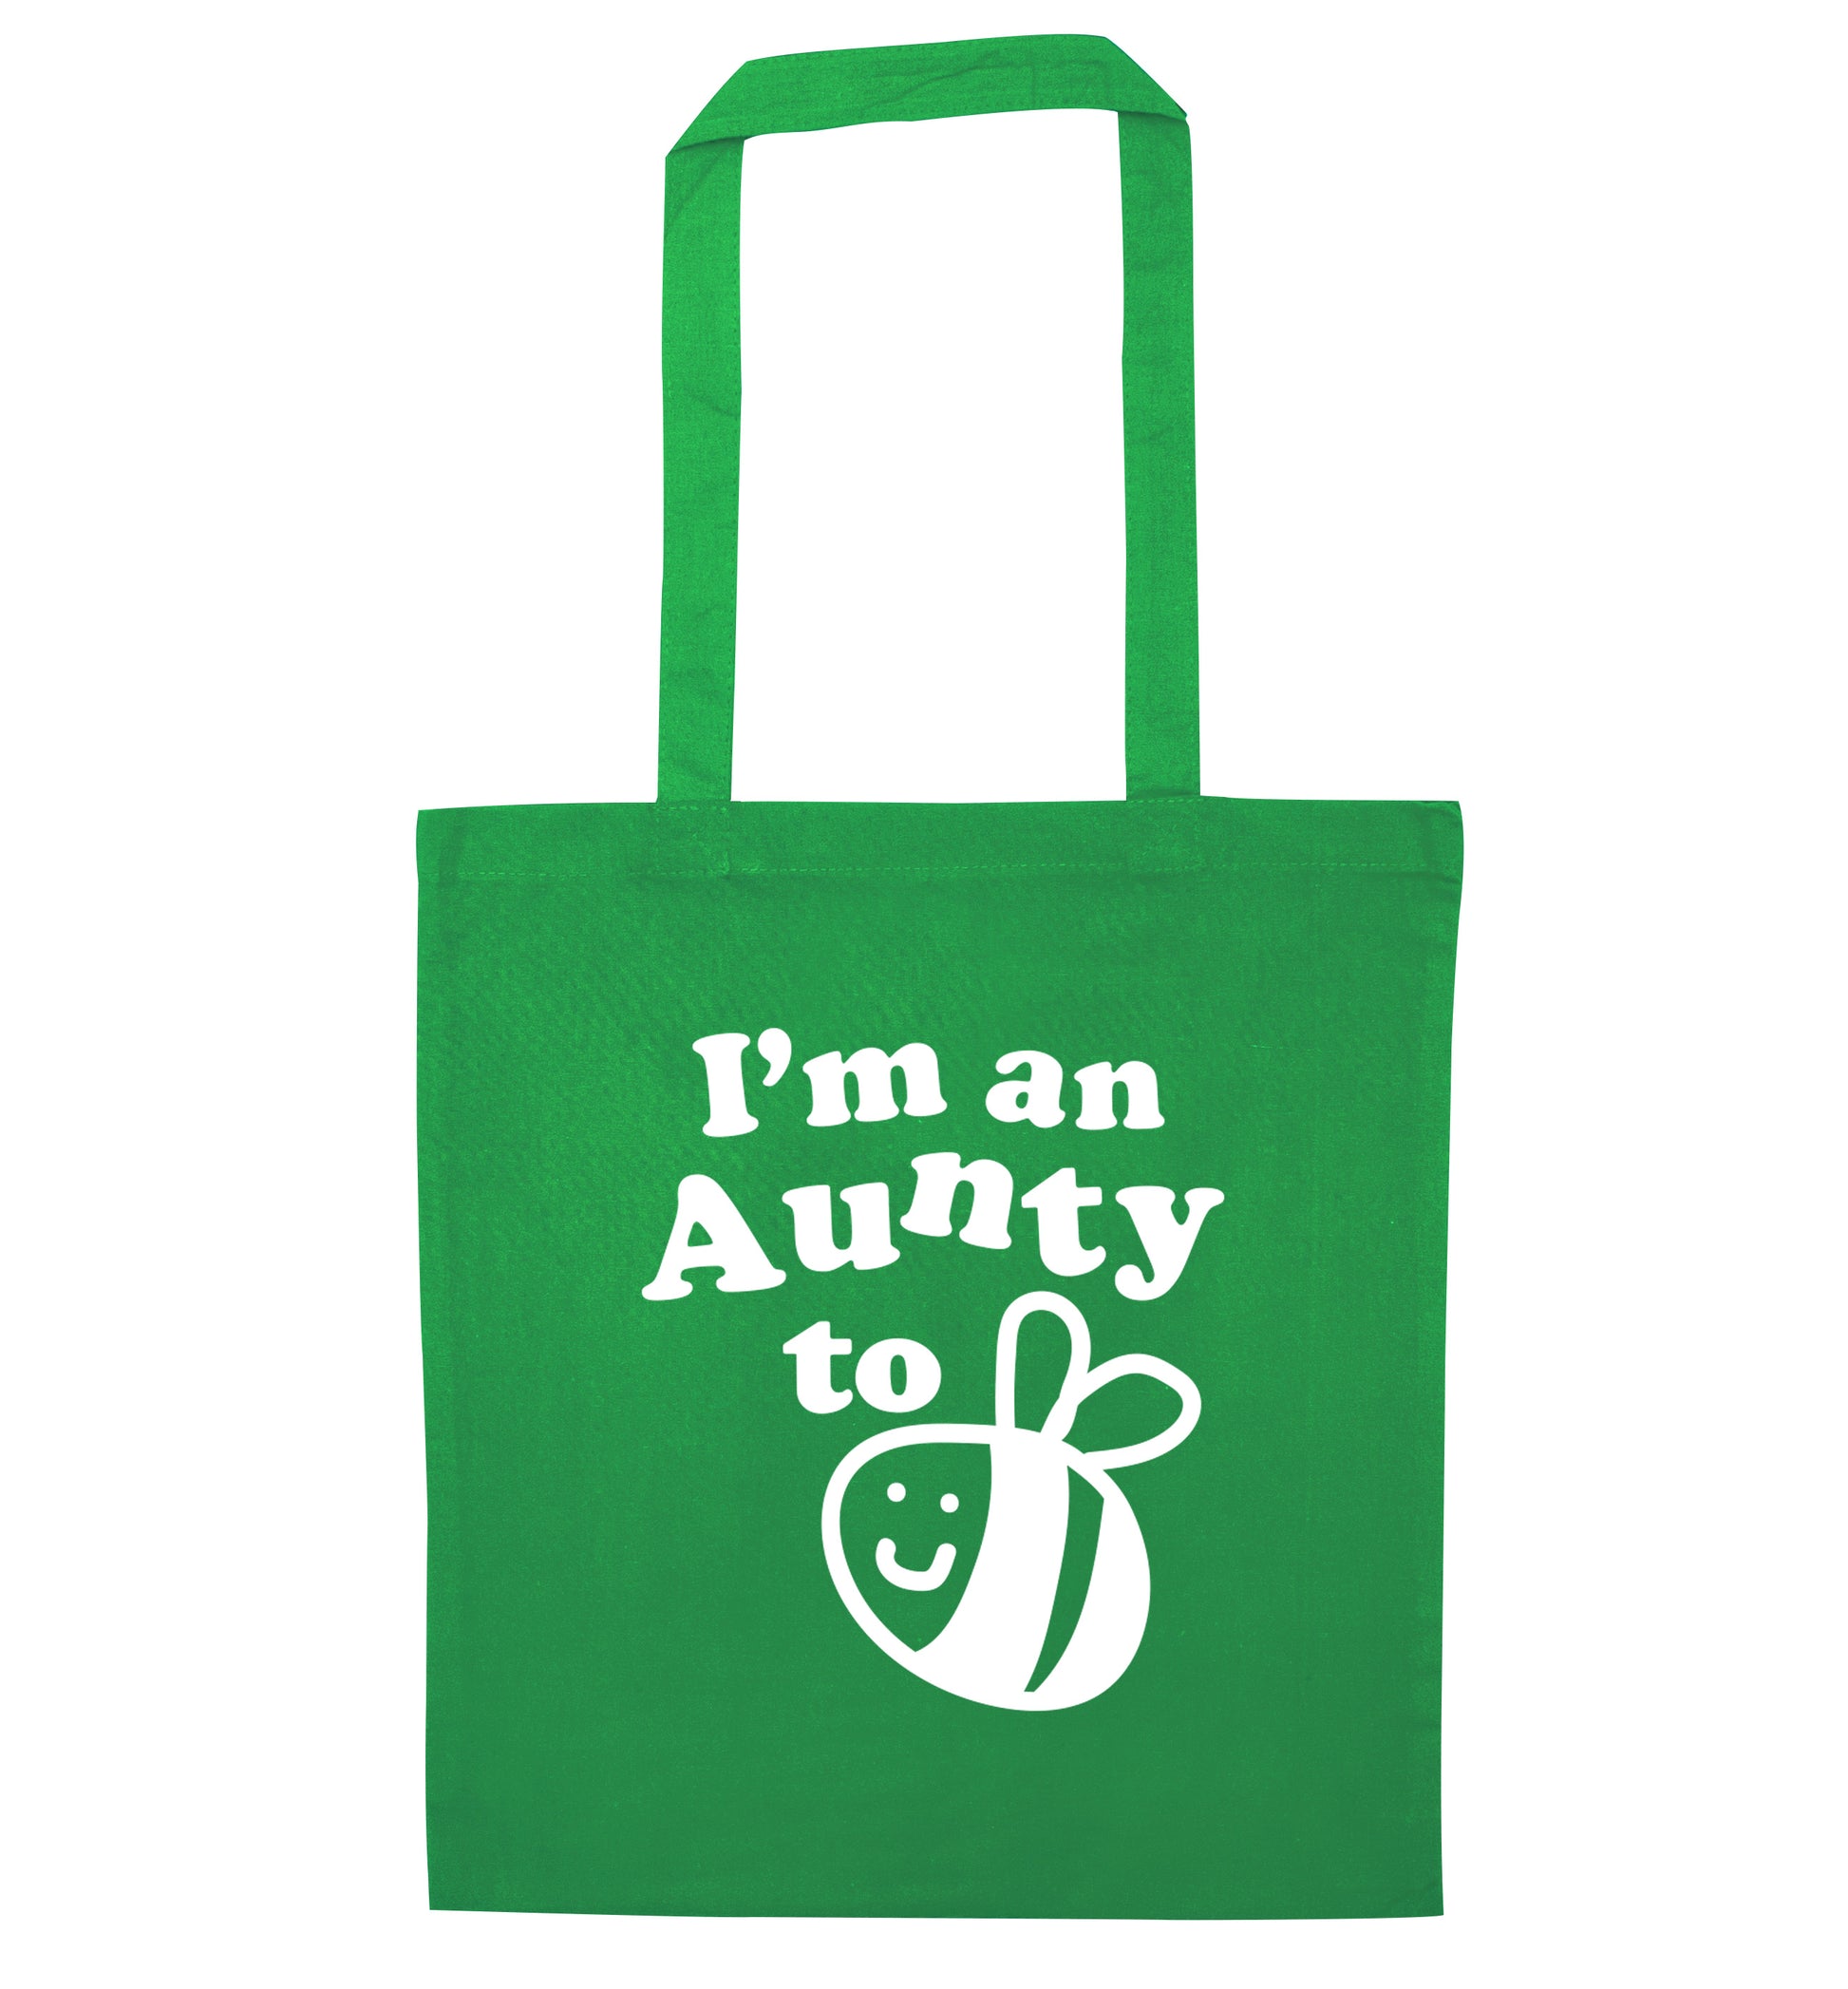 I'm an aunty to be green tote bag